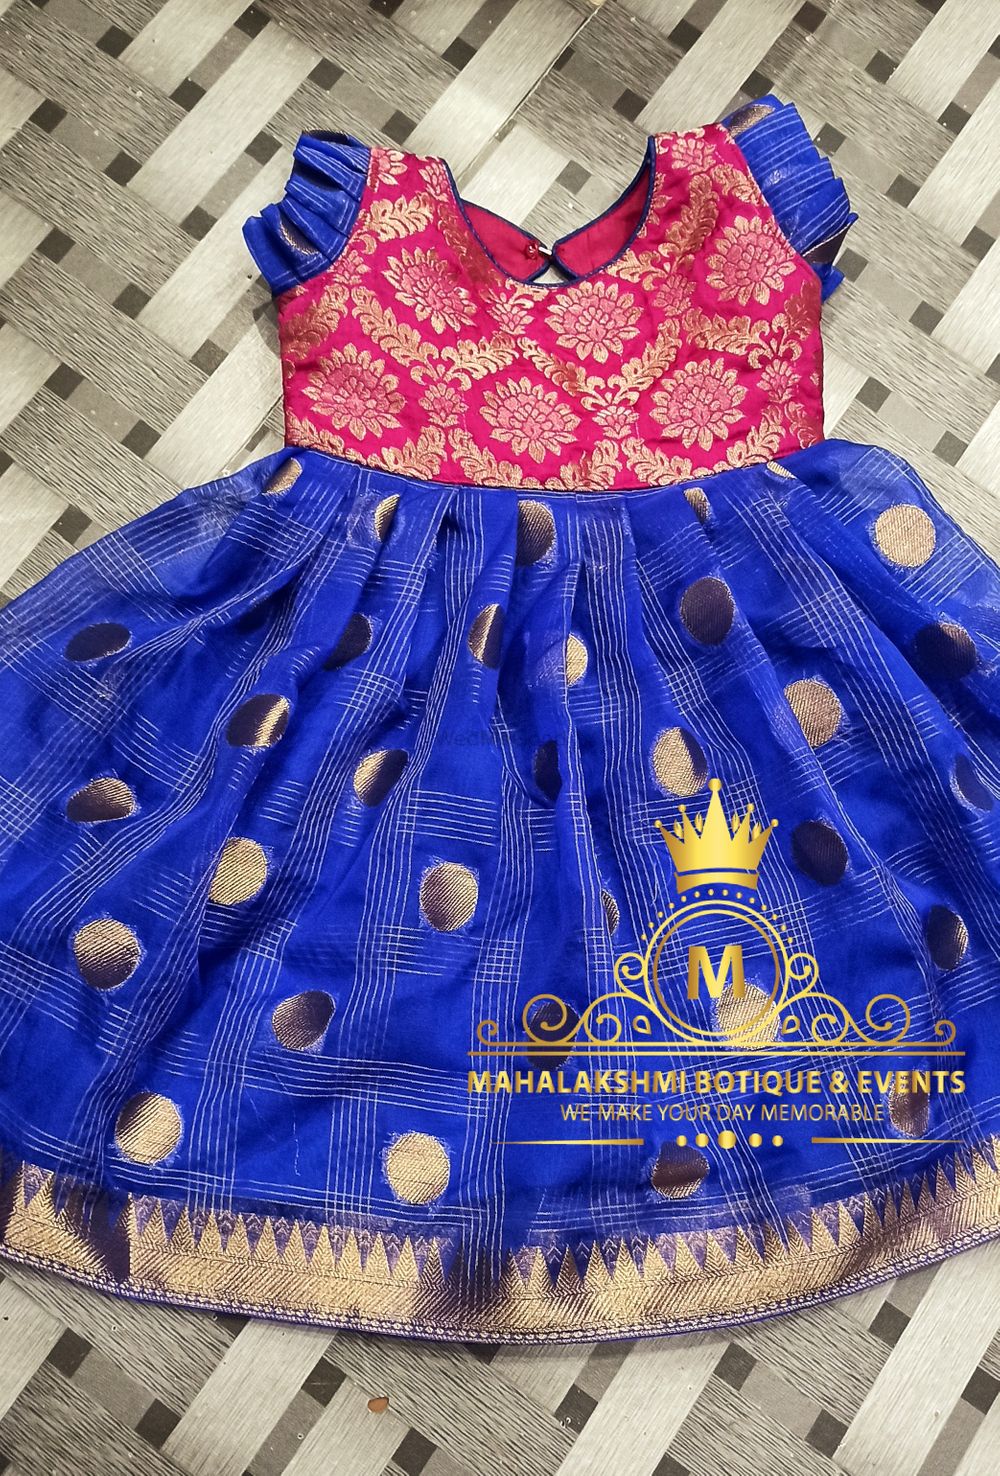 Photo From Trendy clothing - By Sri Mahalakshmi Boutique and Events